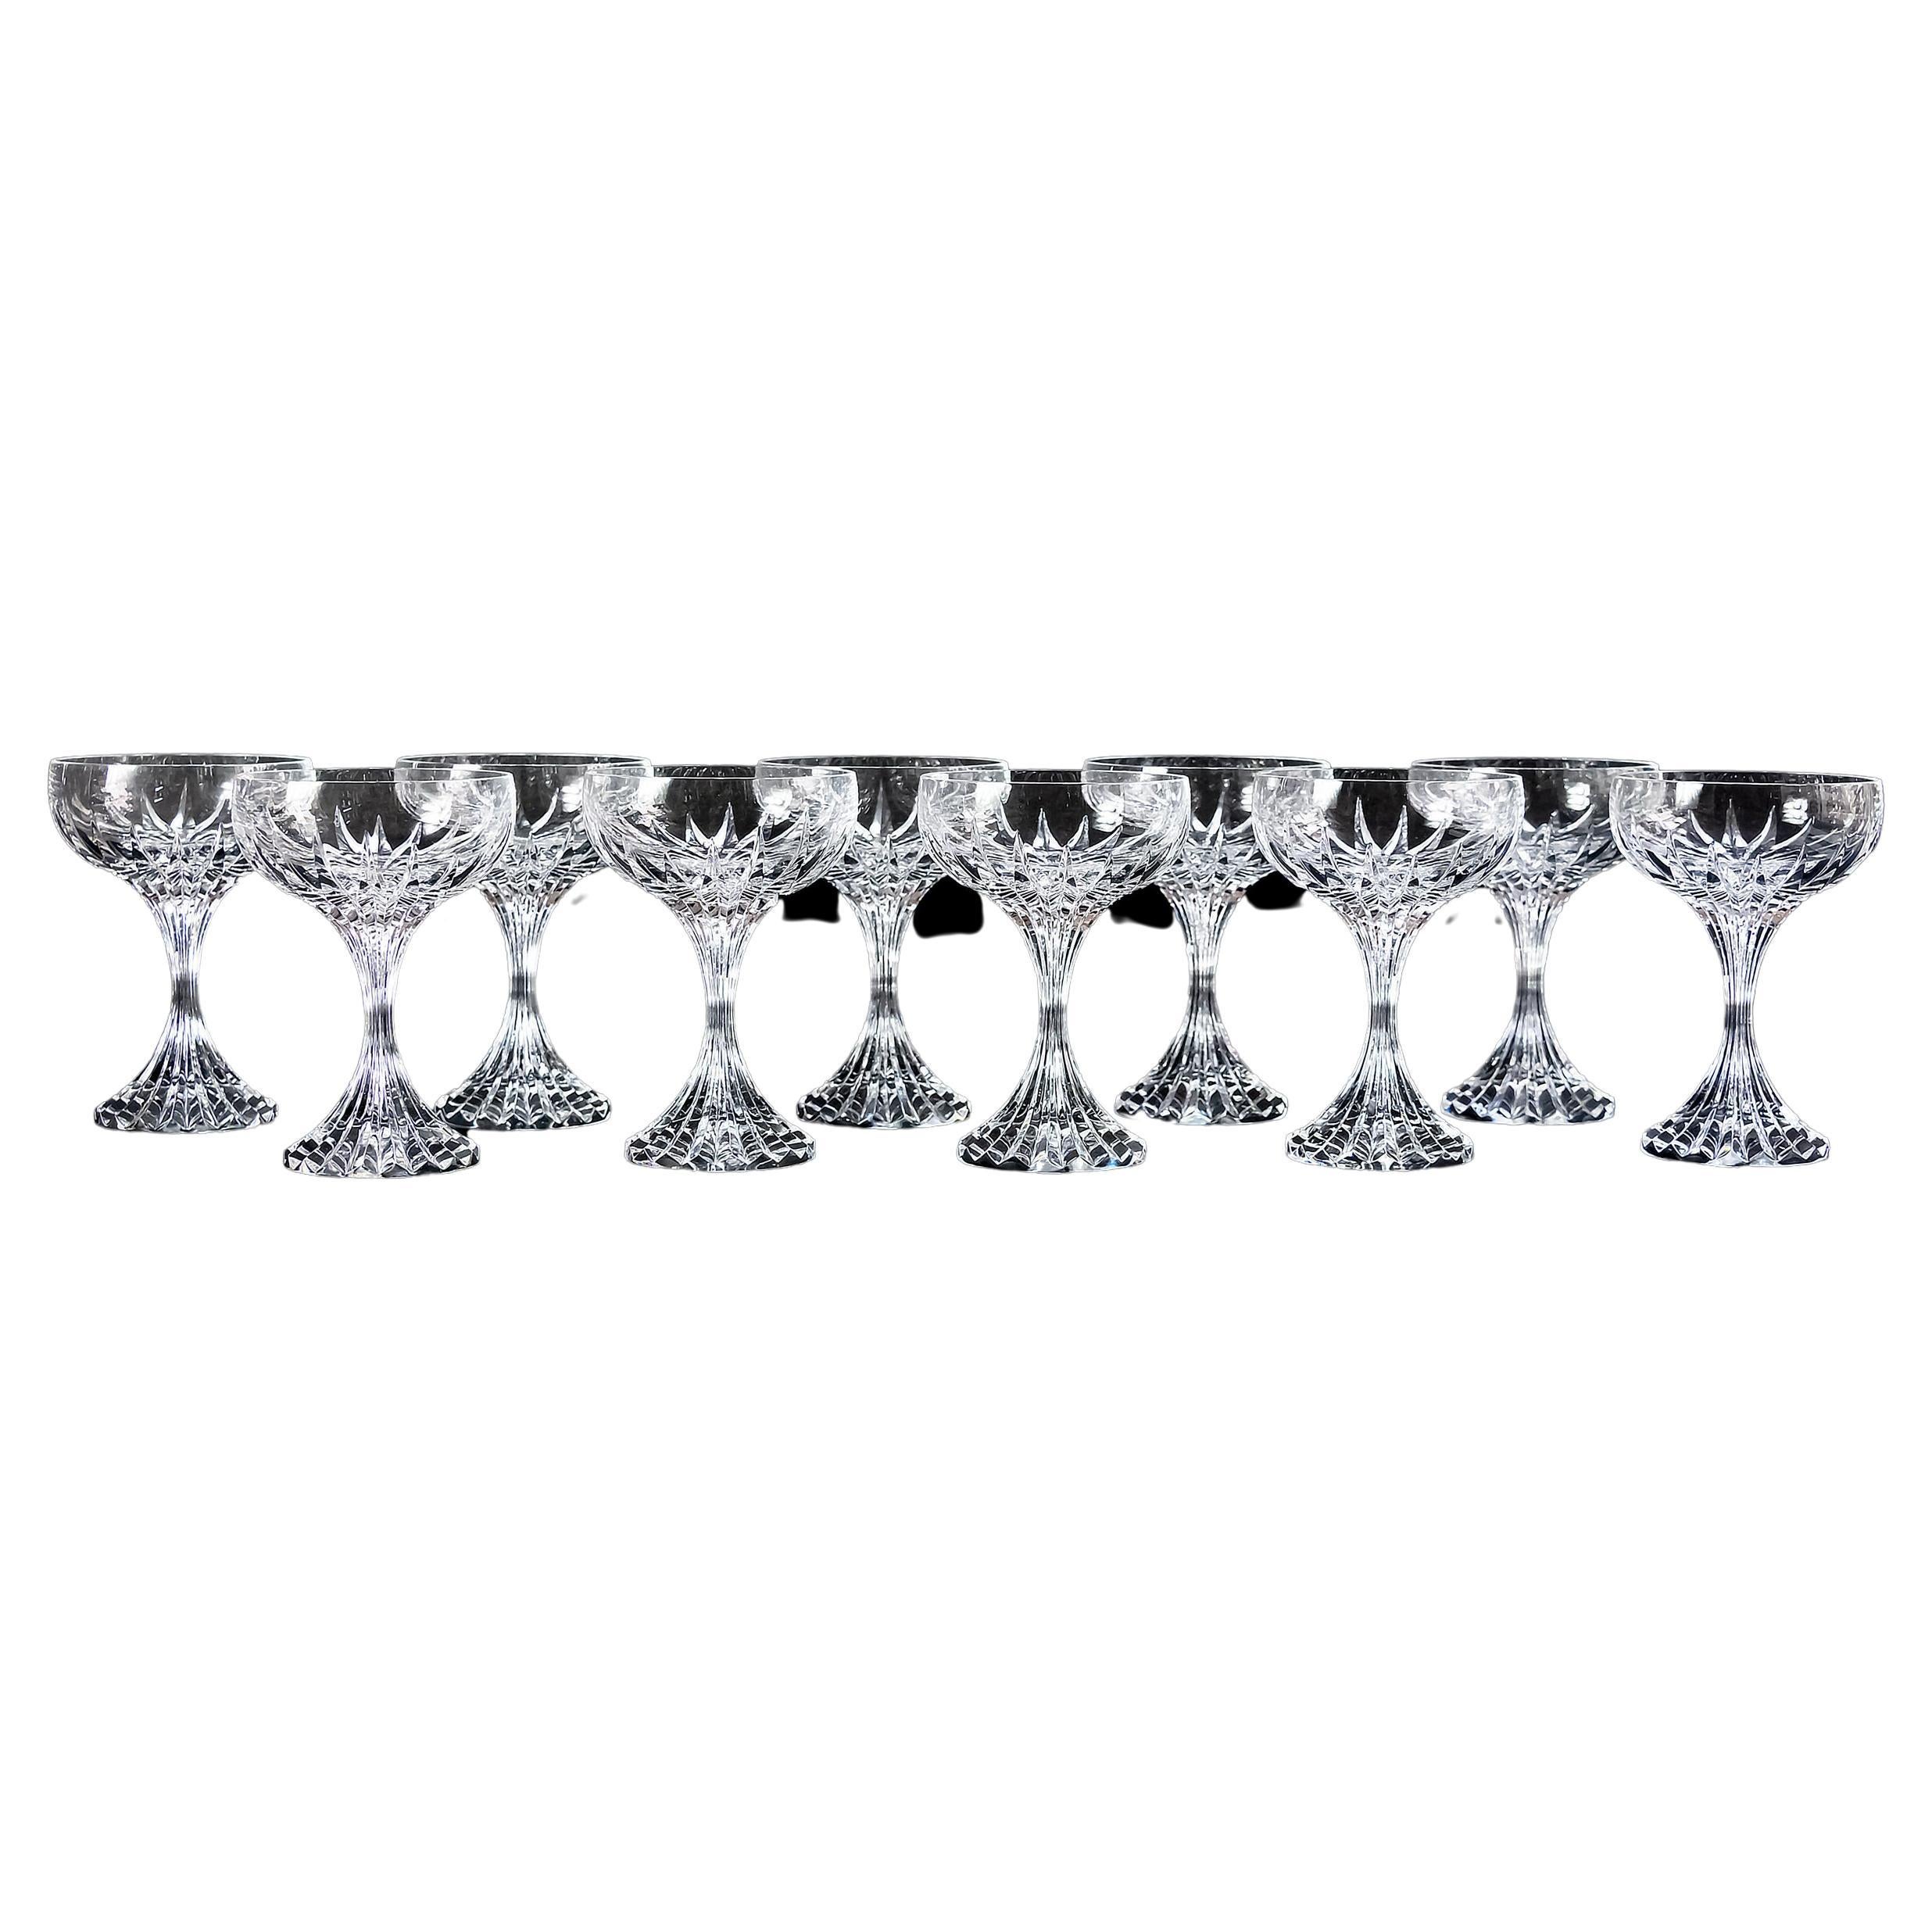 Set of 10 Baccarat crystal champagne coupes MASSENA.
Marked on the bottom.
Excellent - new condition.

